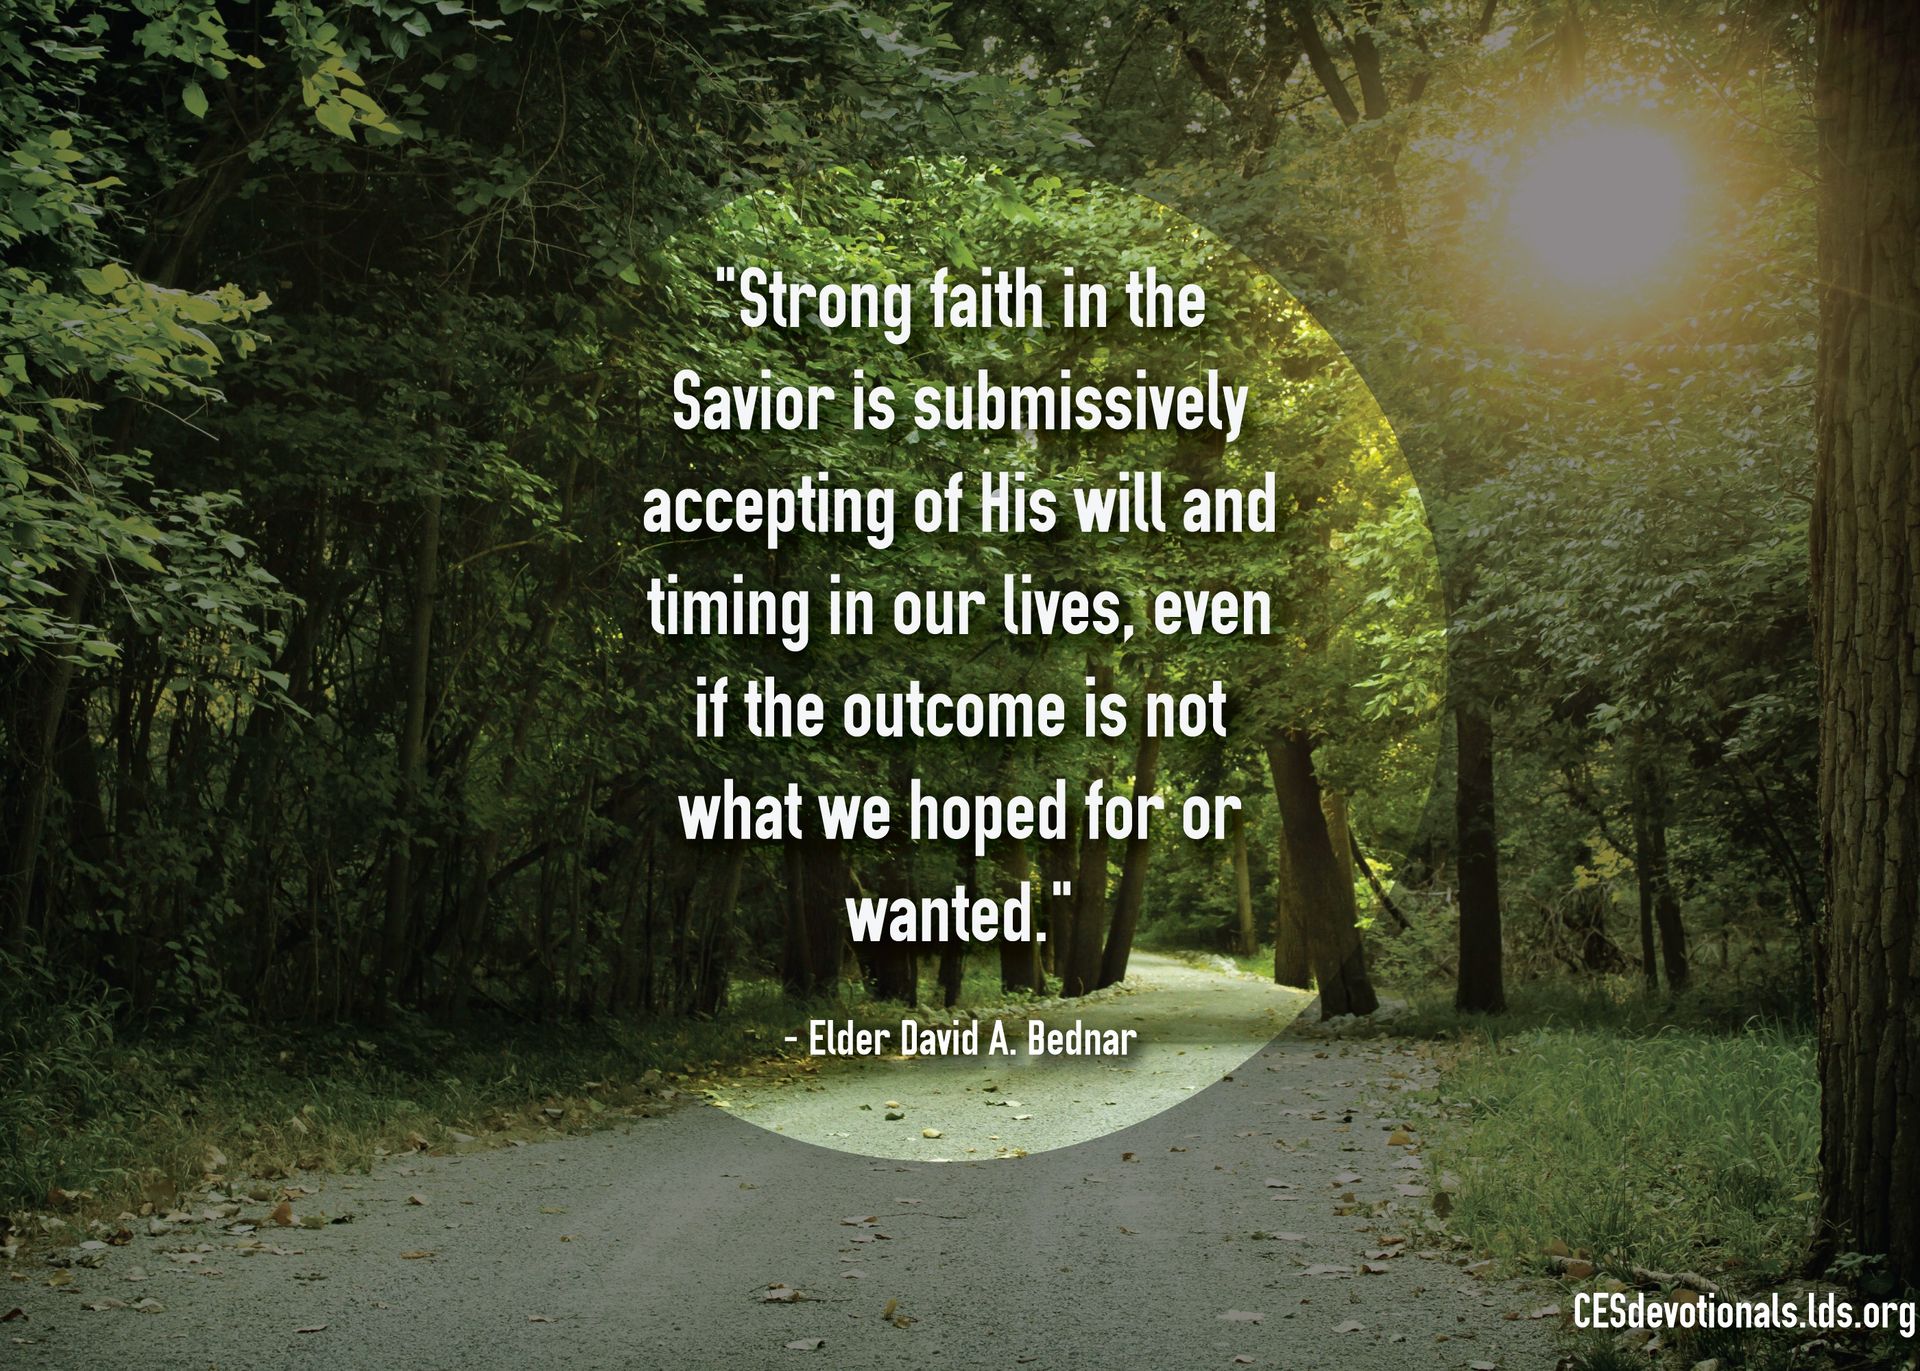 “Strong faith in the Savior is submissively accepting of His will and timing in our lives, even if the outcome is not what we hoped for or wanted.”—Elder David A. Bednar, “That We Might ‘Not … Shrink’” © undefined ipCode 1.